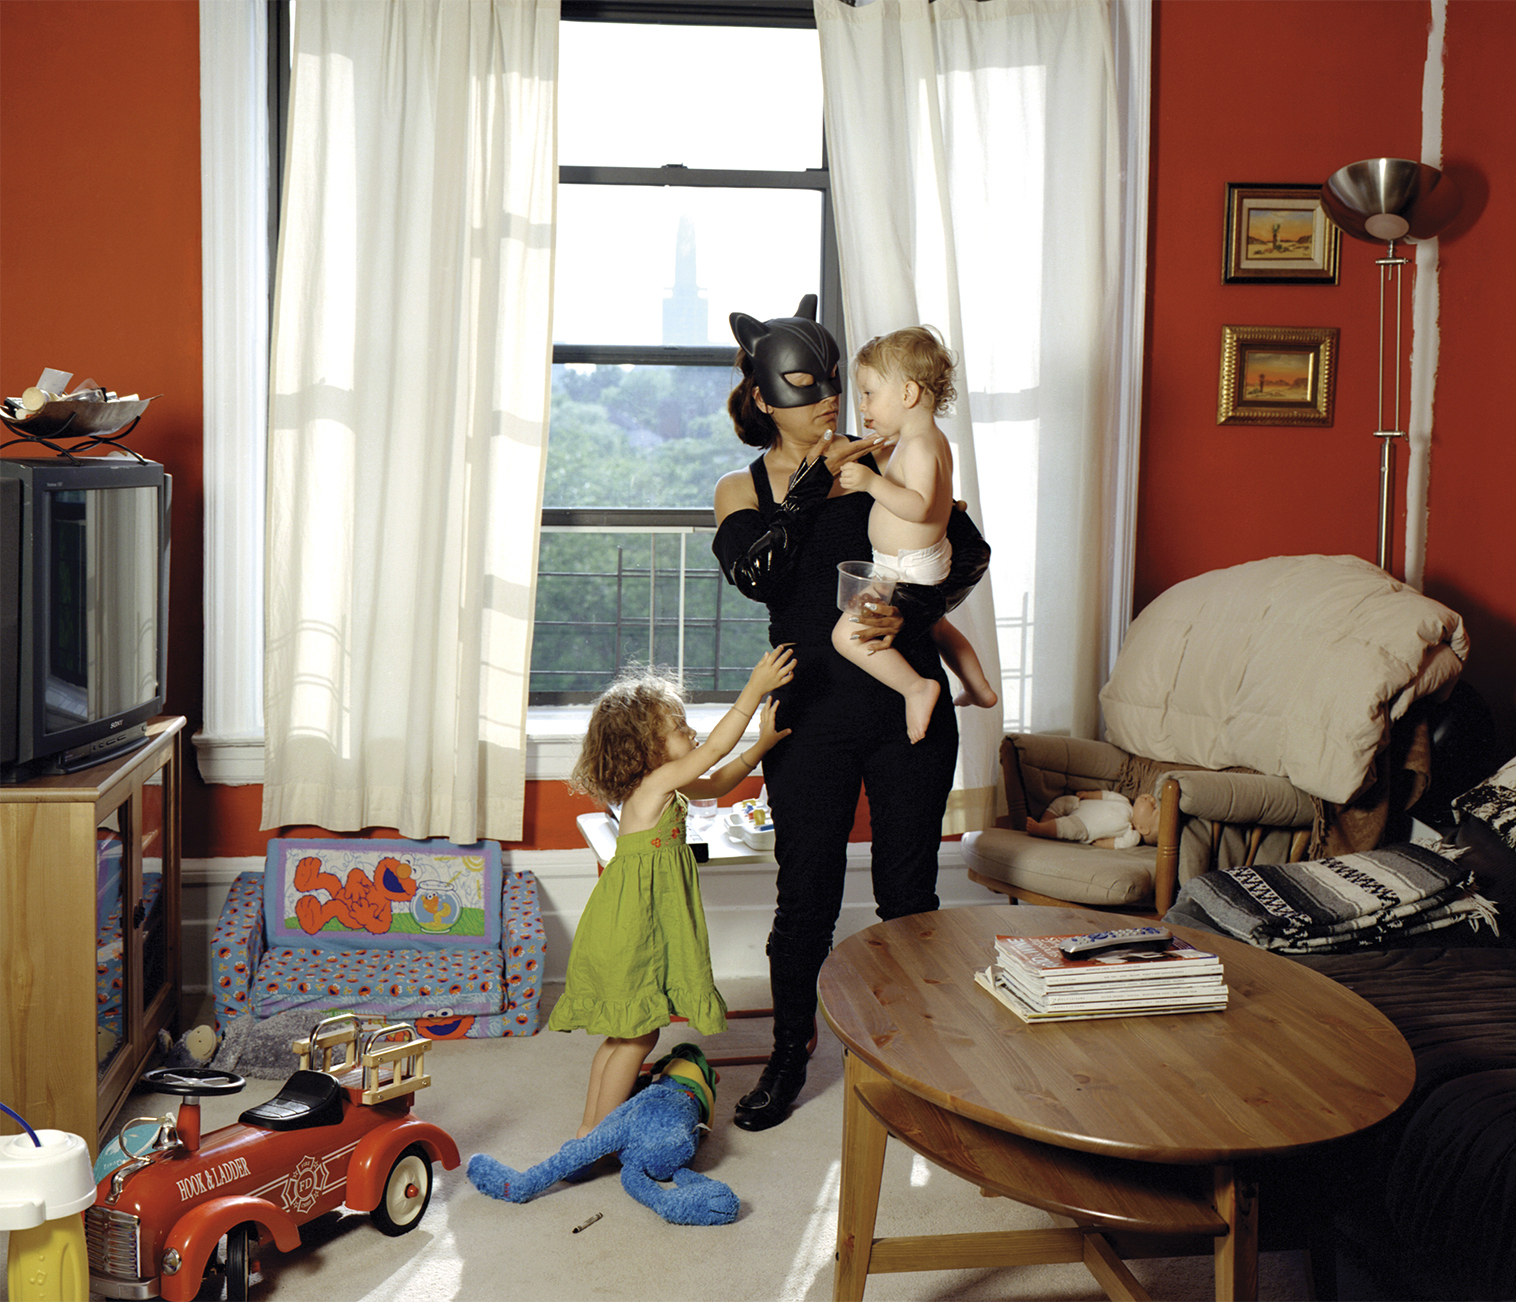 A woman dressed as Catwoman holding a baby inside an apartment. A toddler wearing a green dress pulls at her